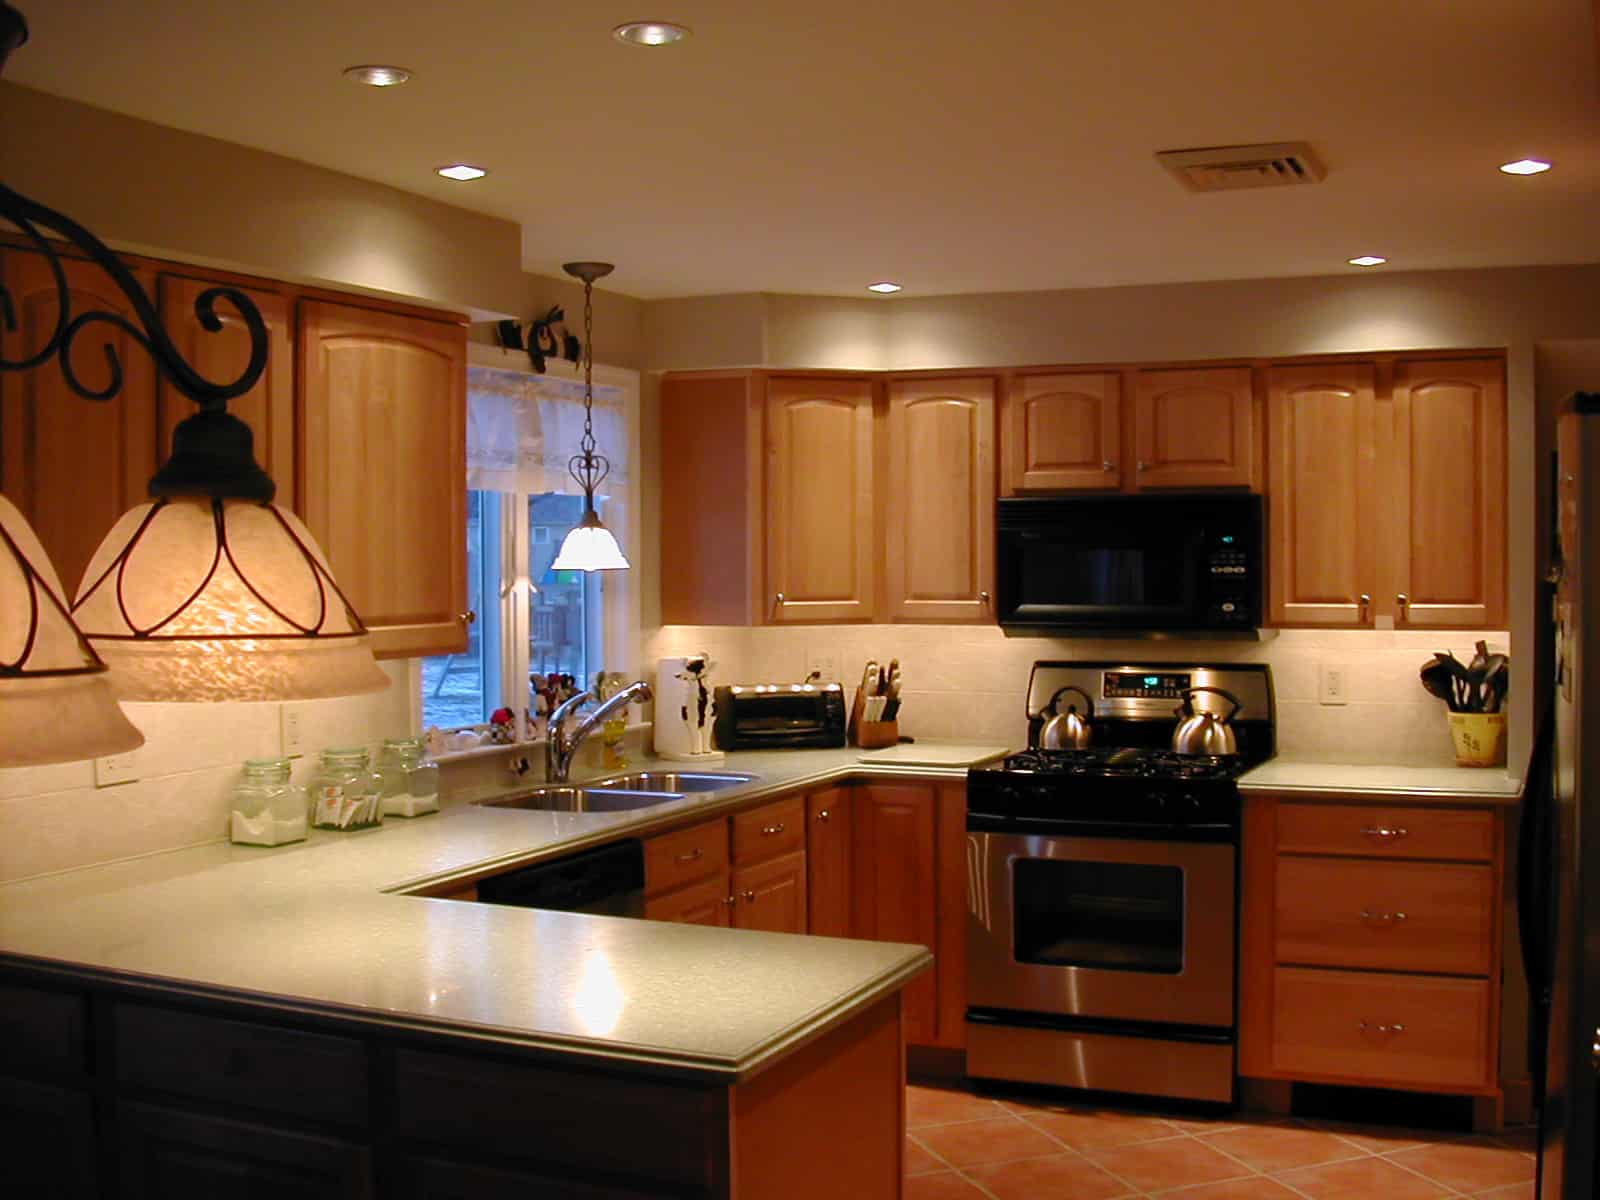 lighting in small kitchen